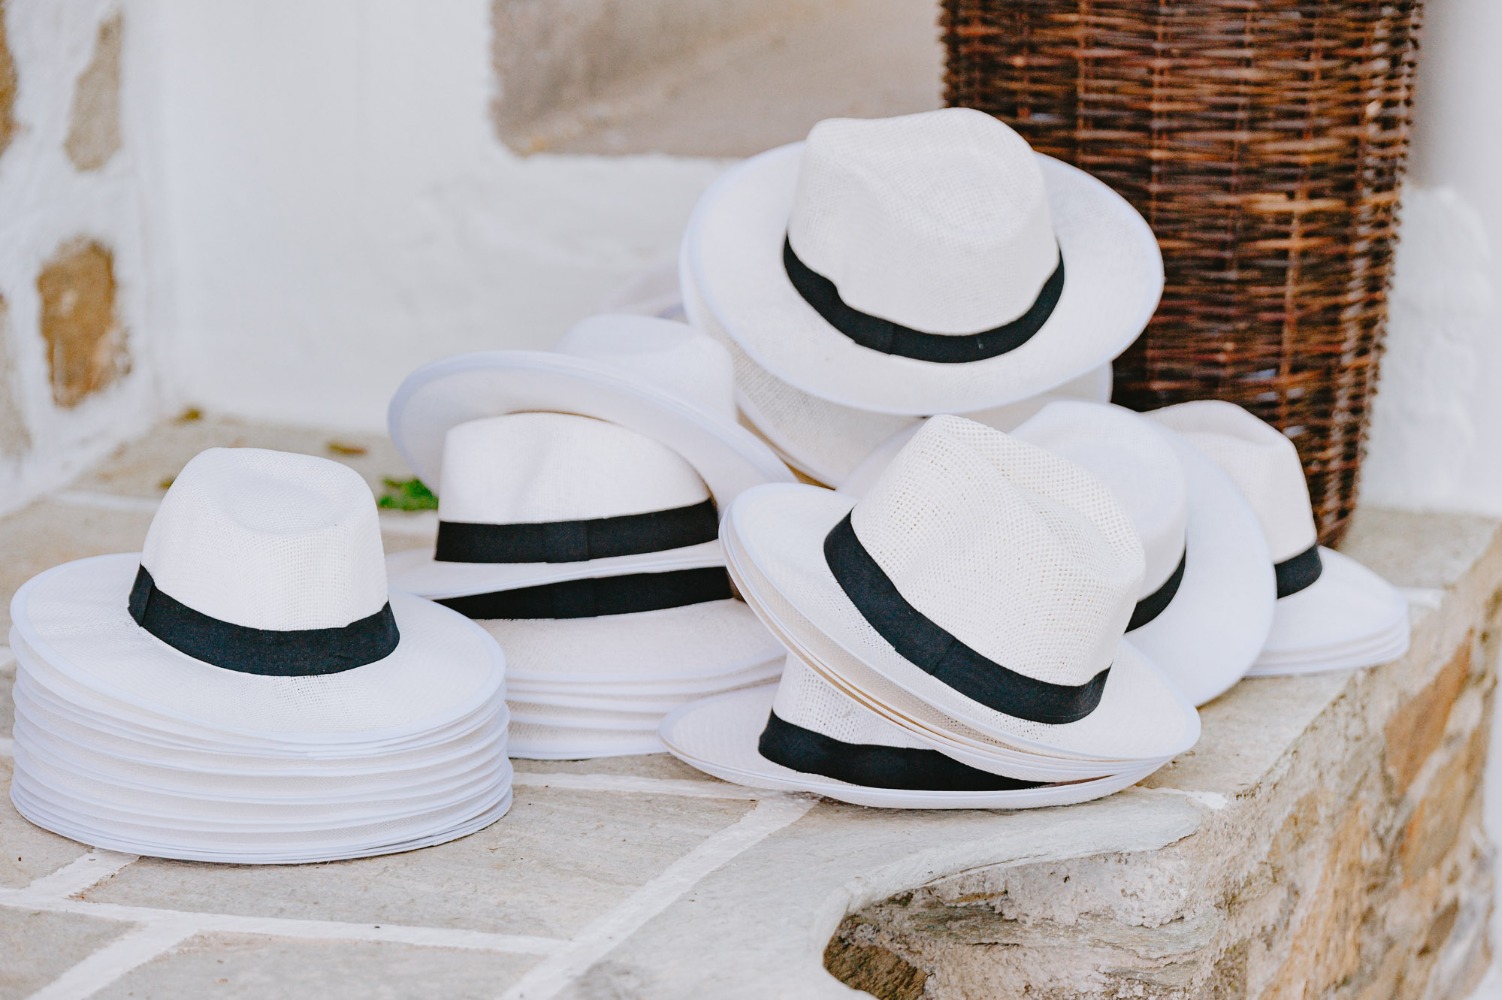 Fedora hats for wedding guests